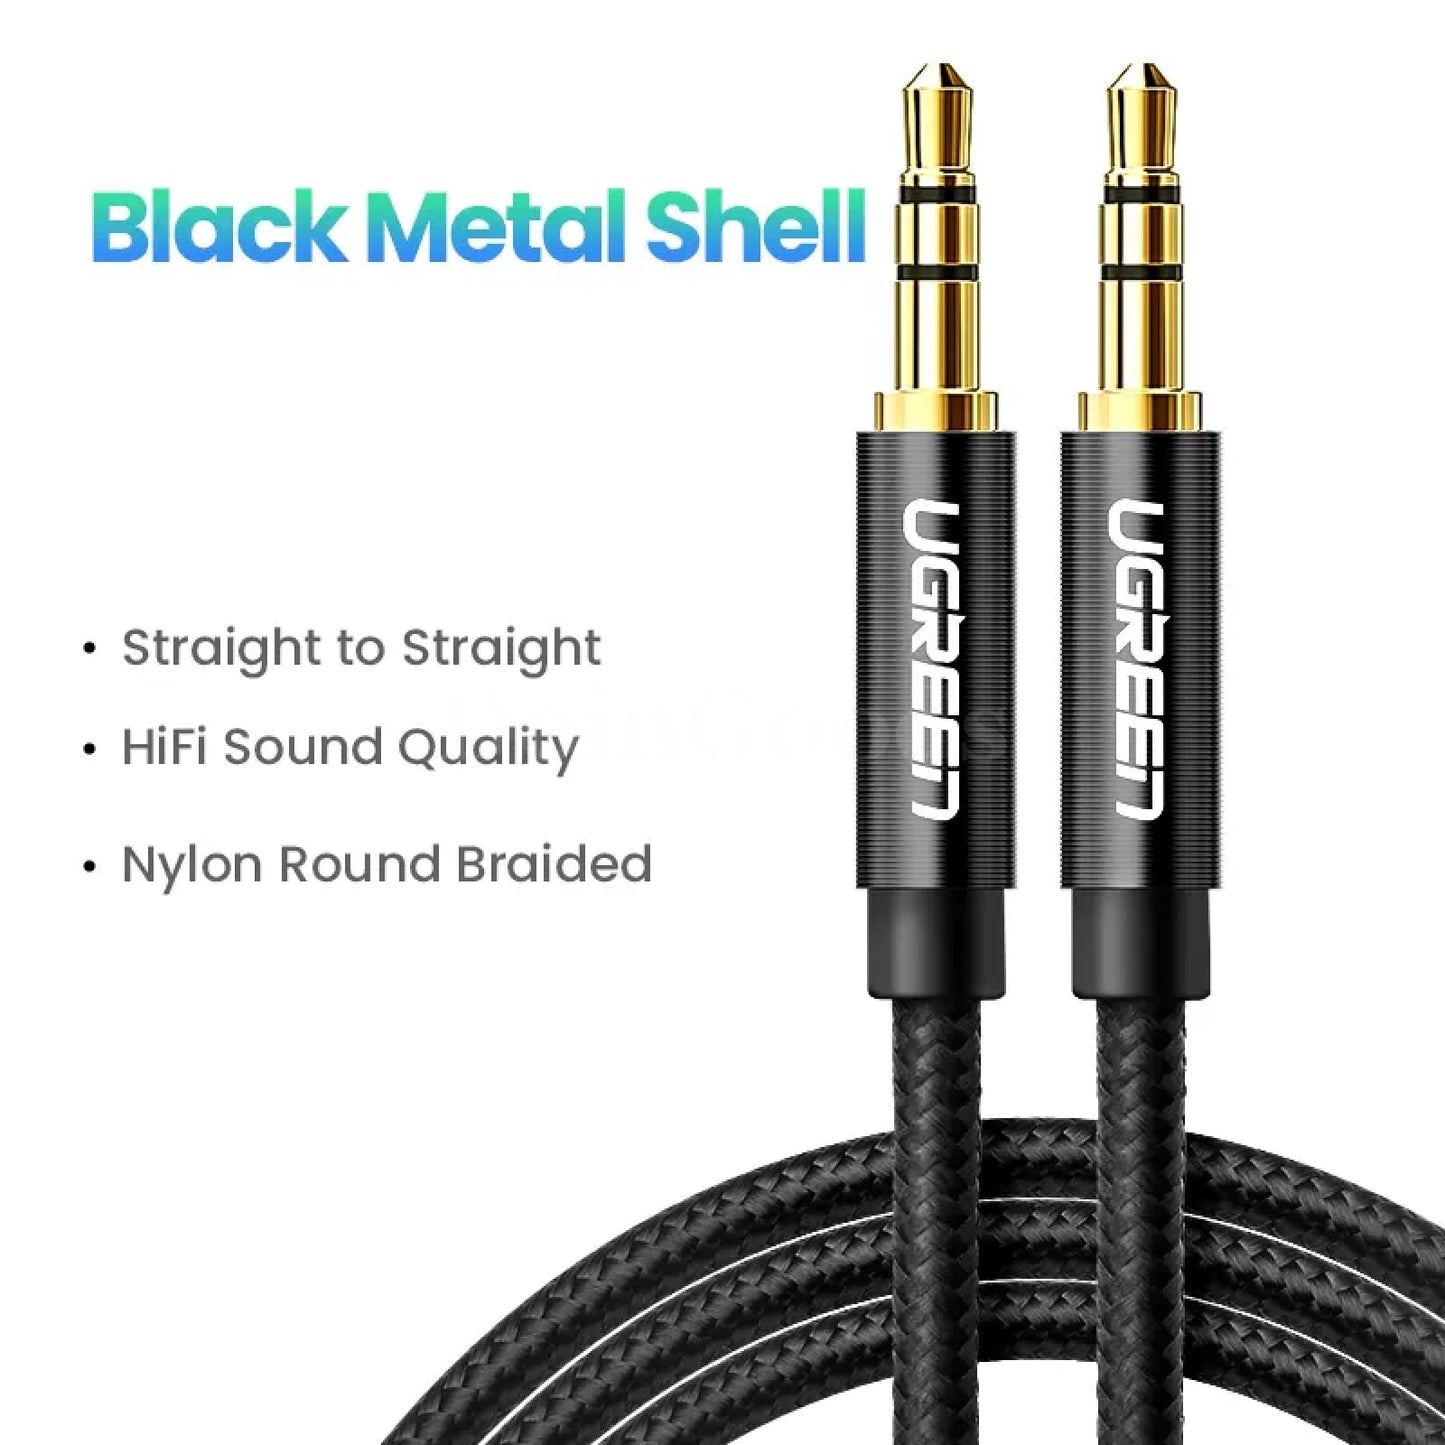 Ugreen 3.5Mm Male To Aux Cable - Audio For Iphone Computer Headphones And More Black Metal Shell /